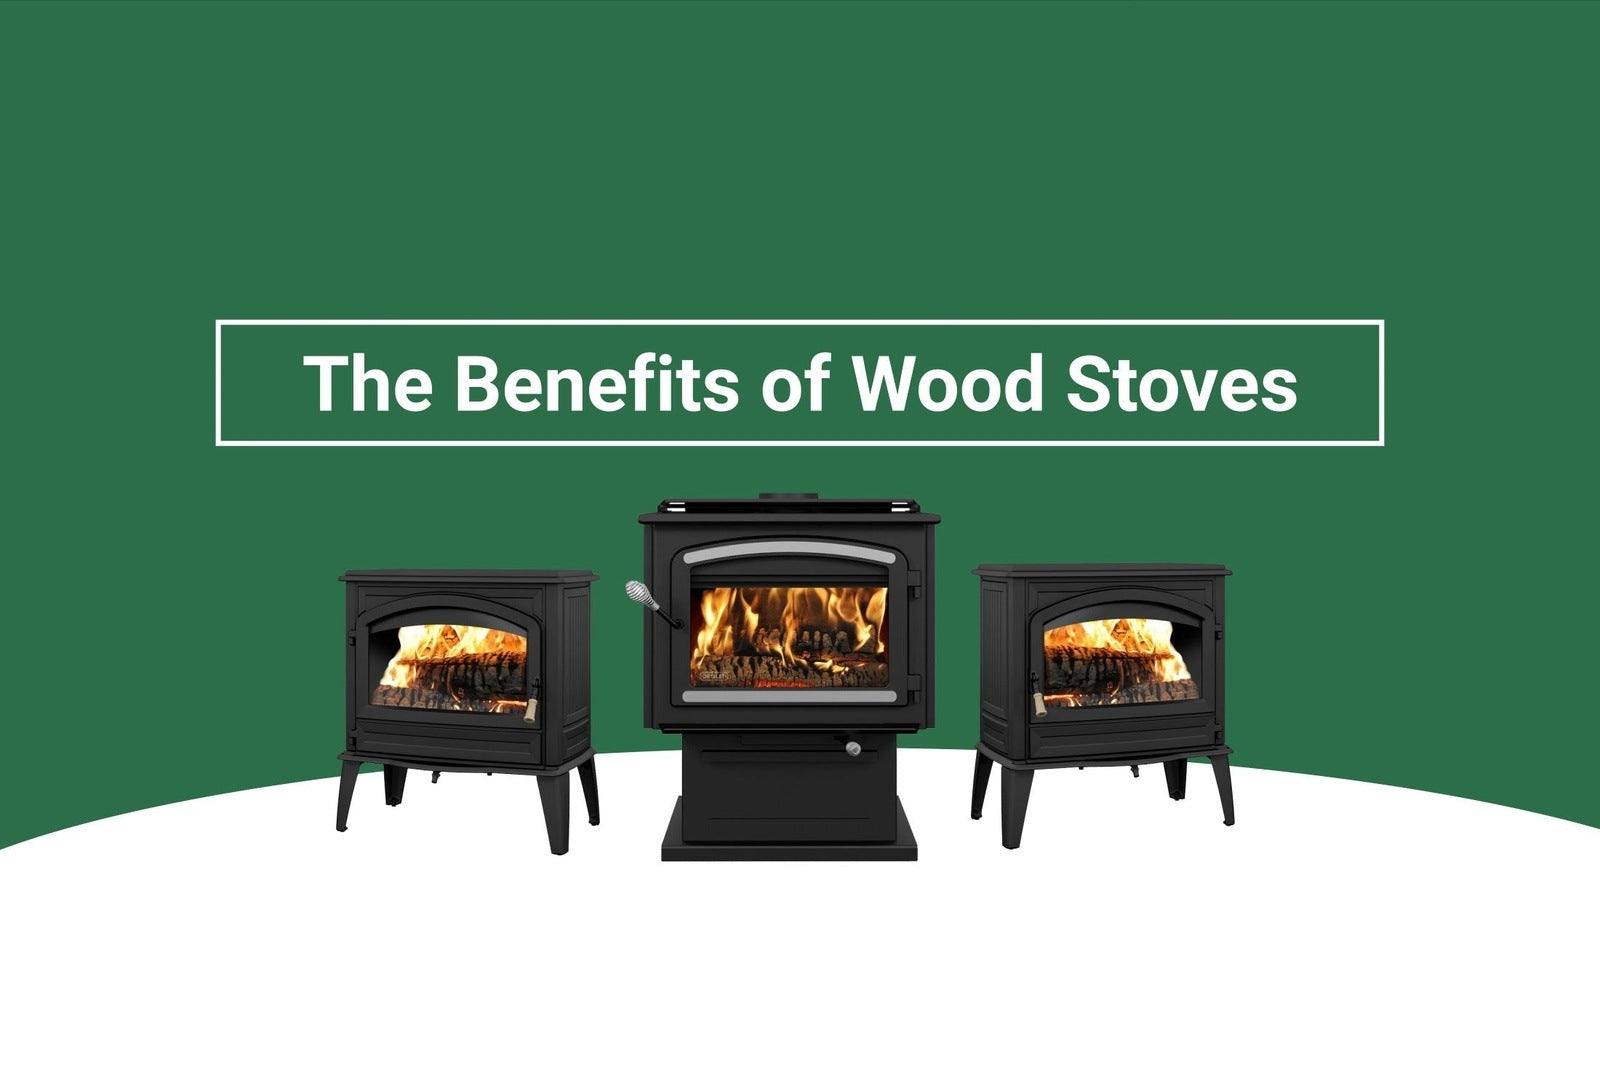 The Benefits of Wood Stoves